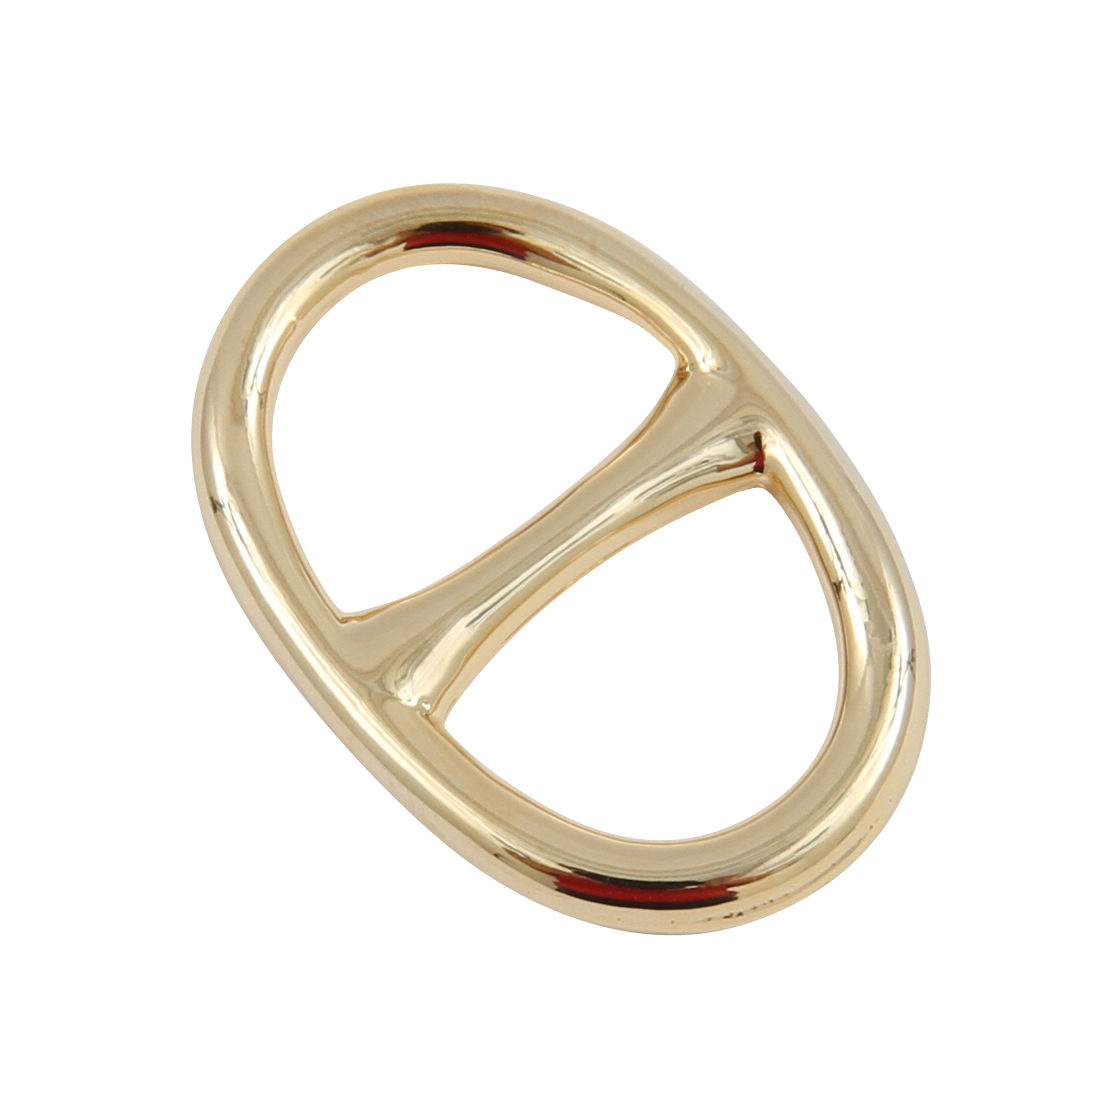 Oval Anchor chain Scarf ring Yellow gold platedflorakoh